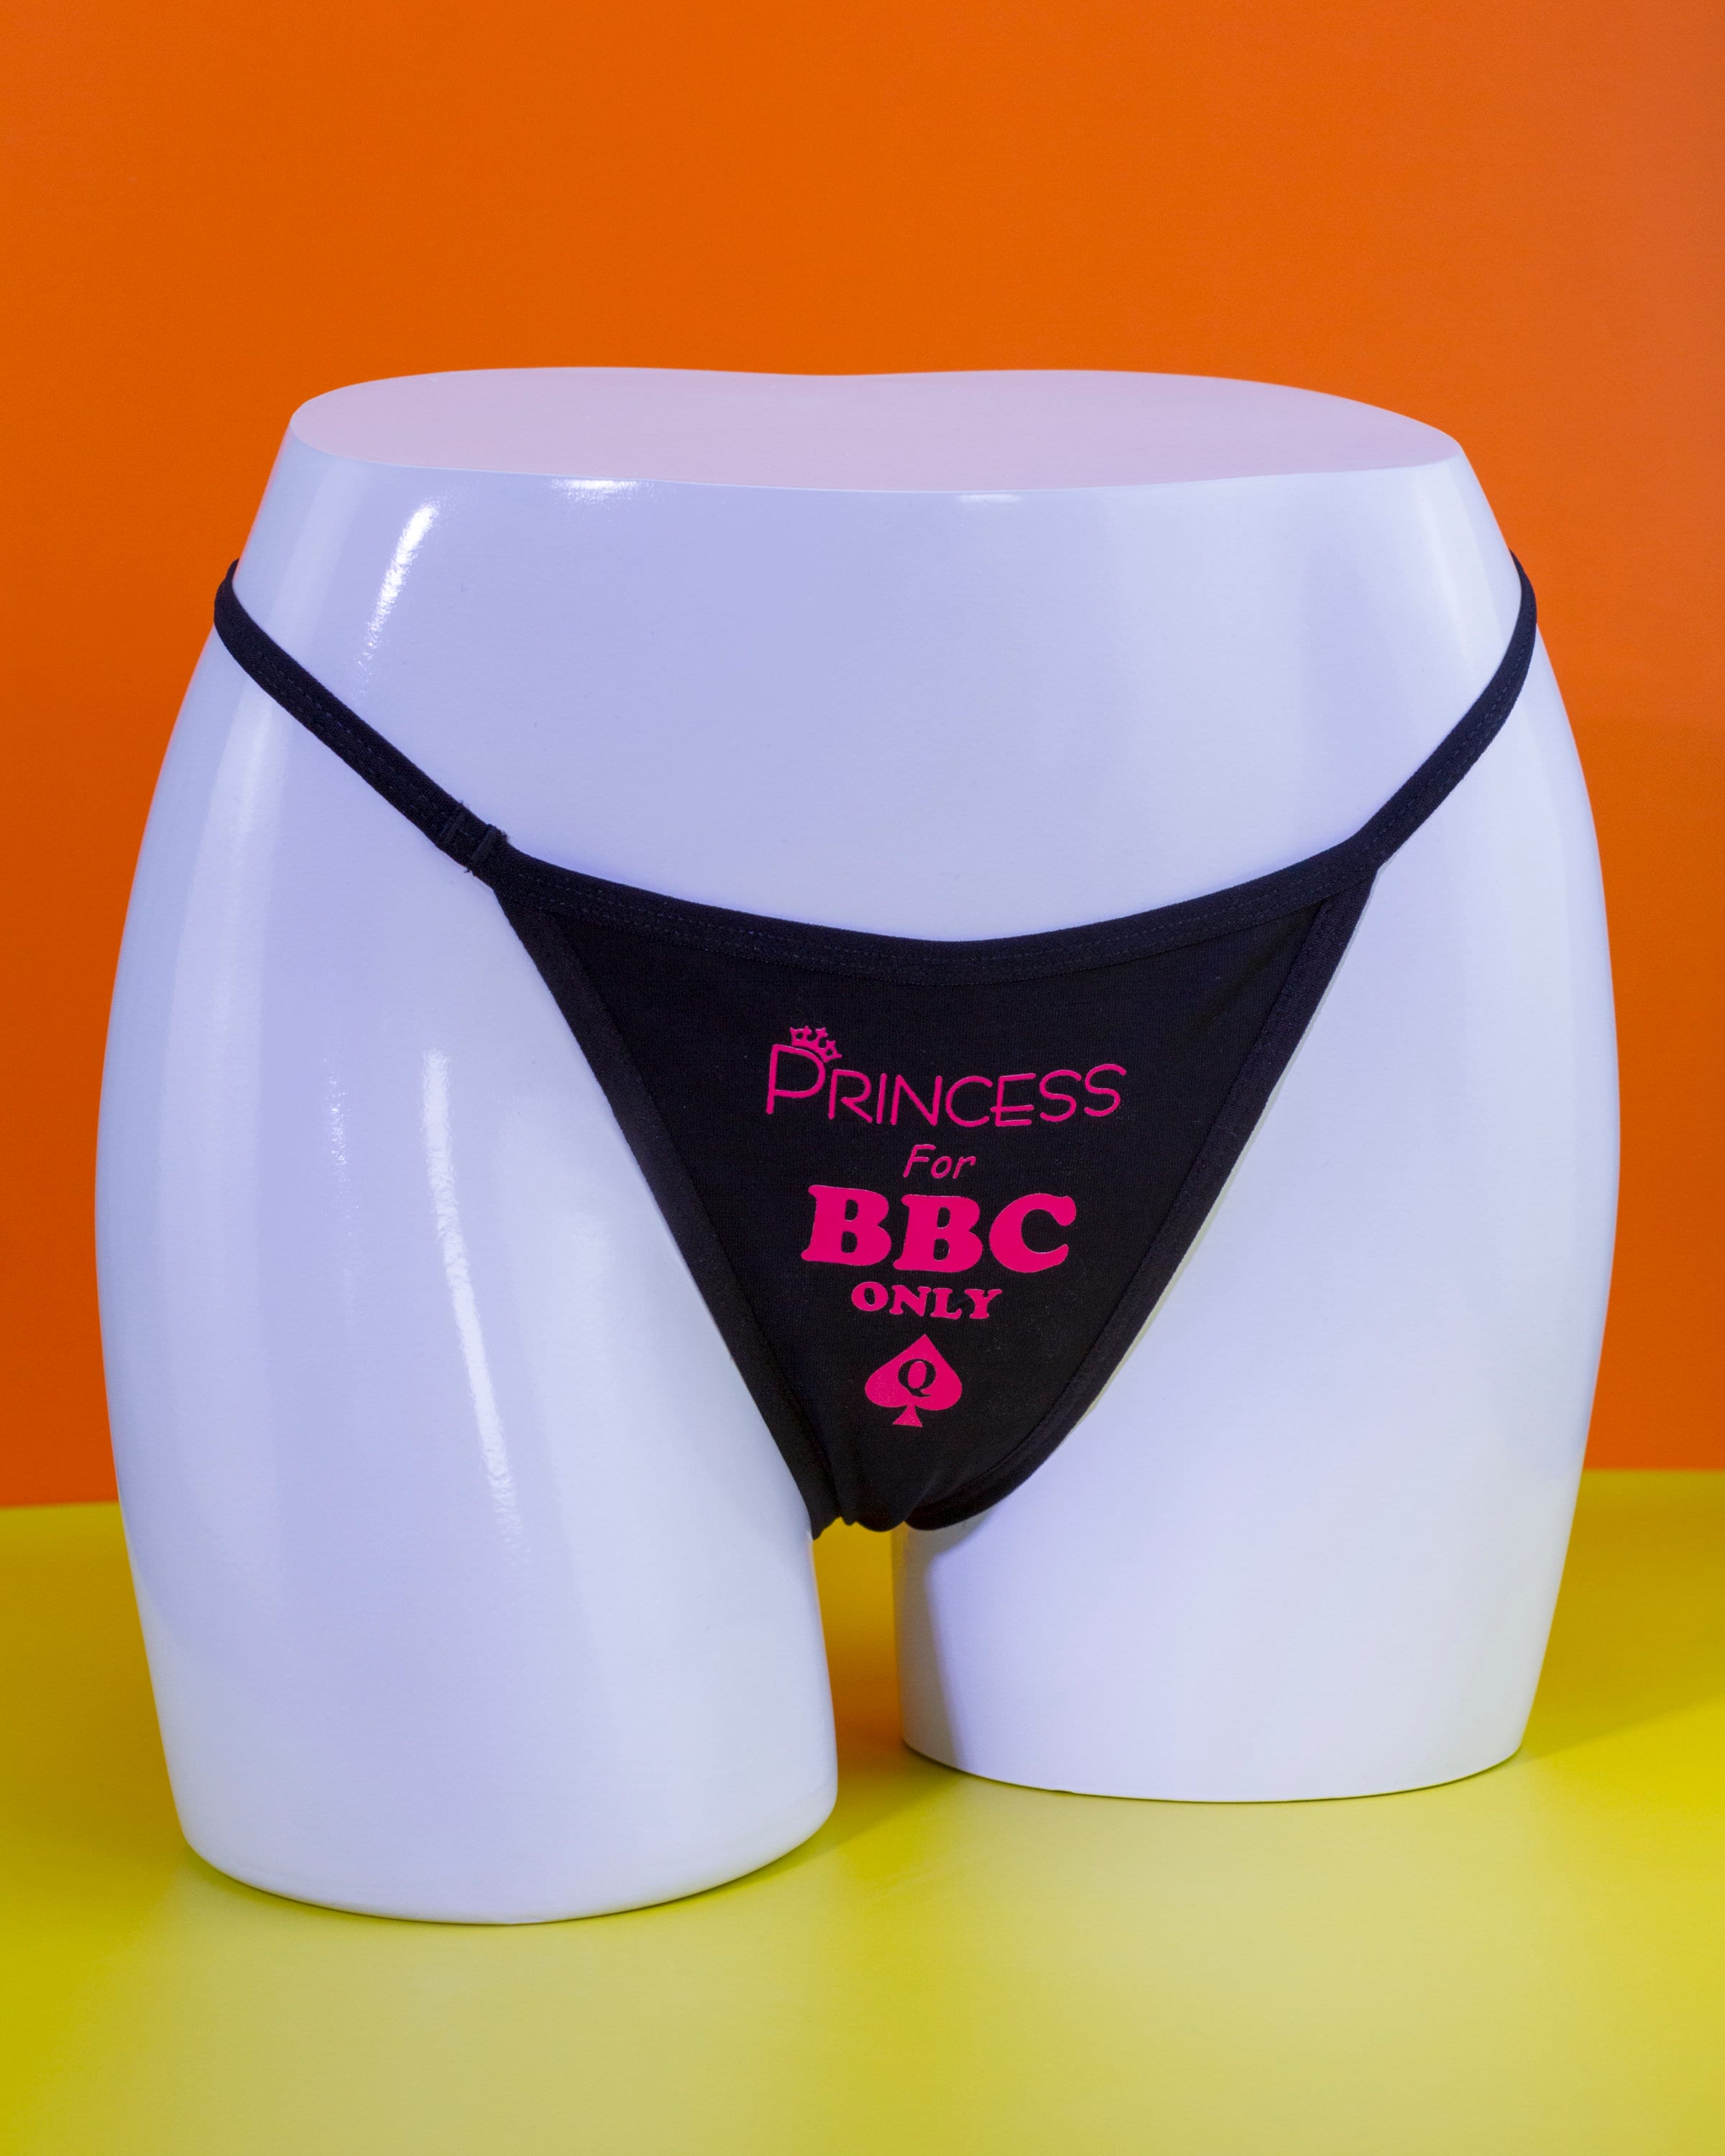 Bbc Qos Princess For Bbc Only Hotwife T String Thong Panty Etsy 